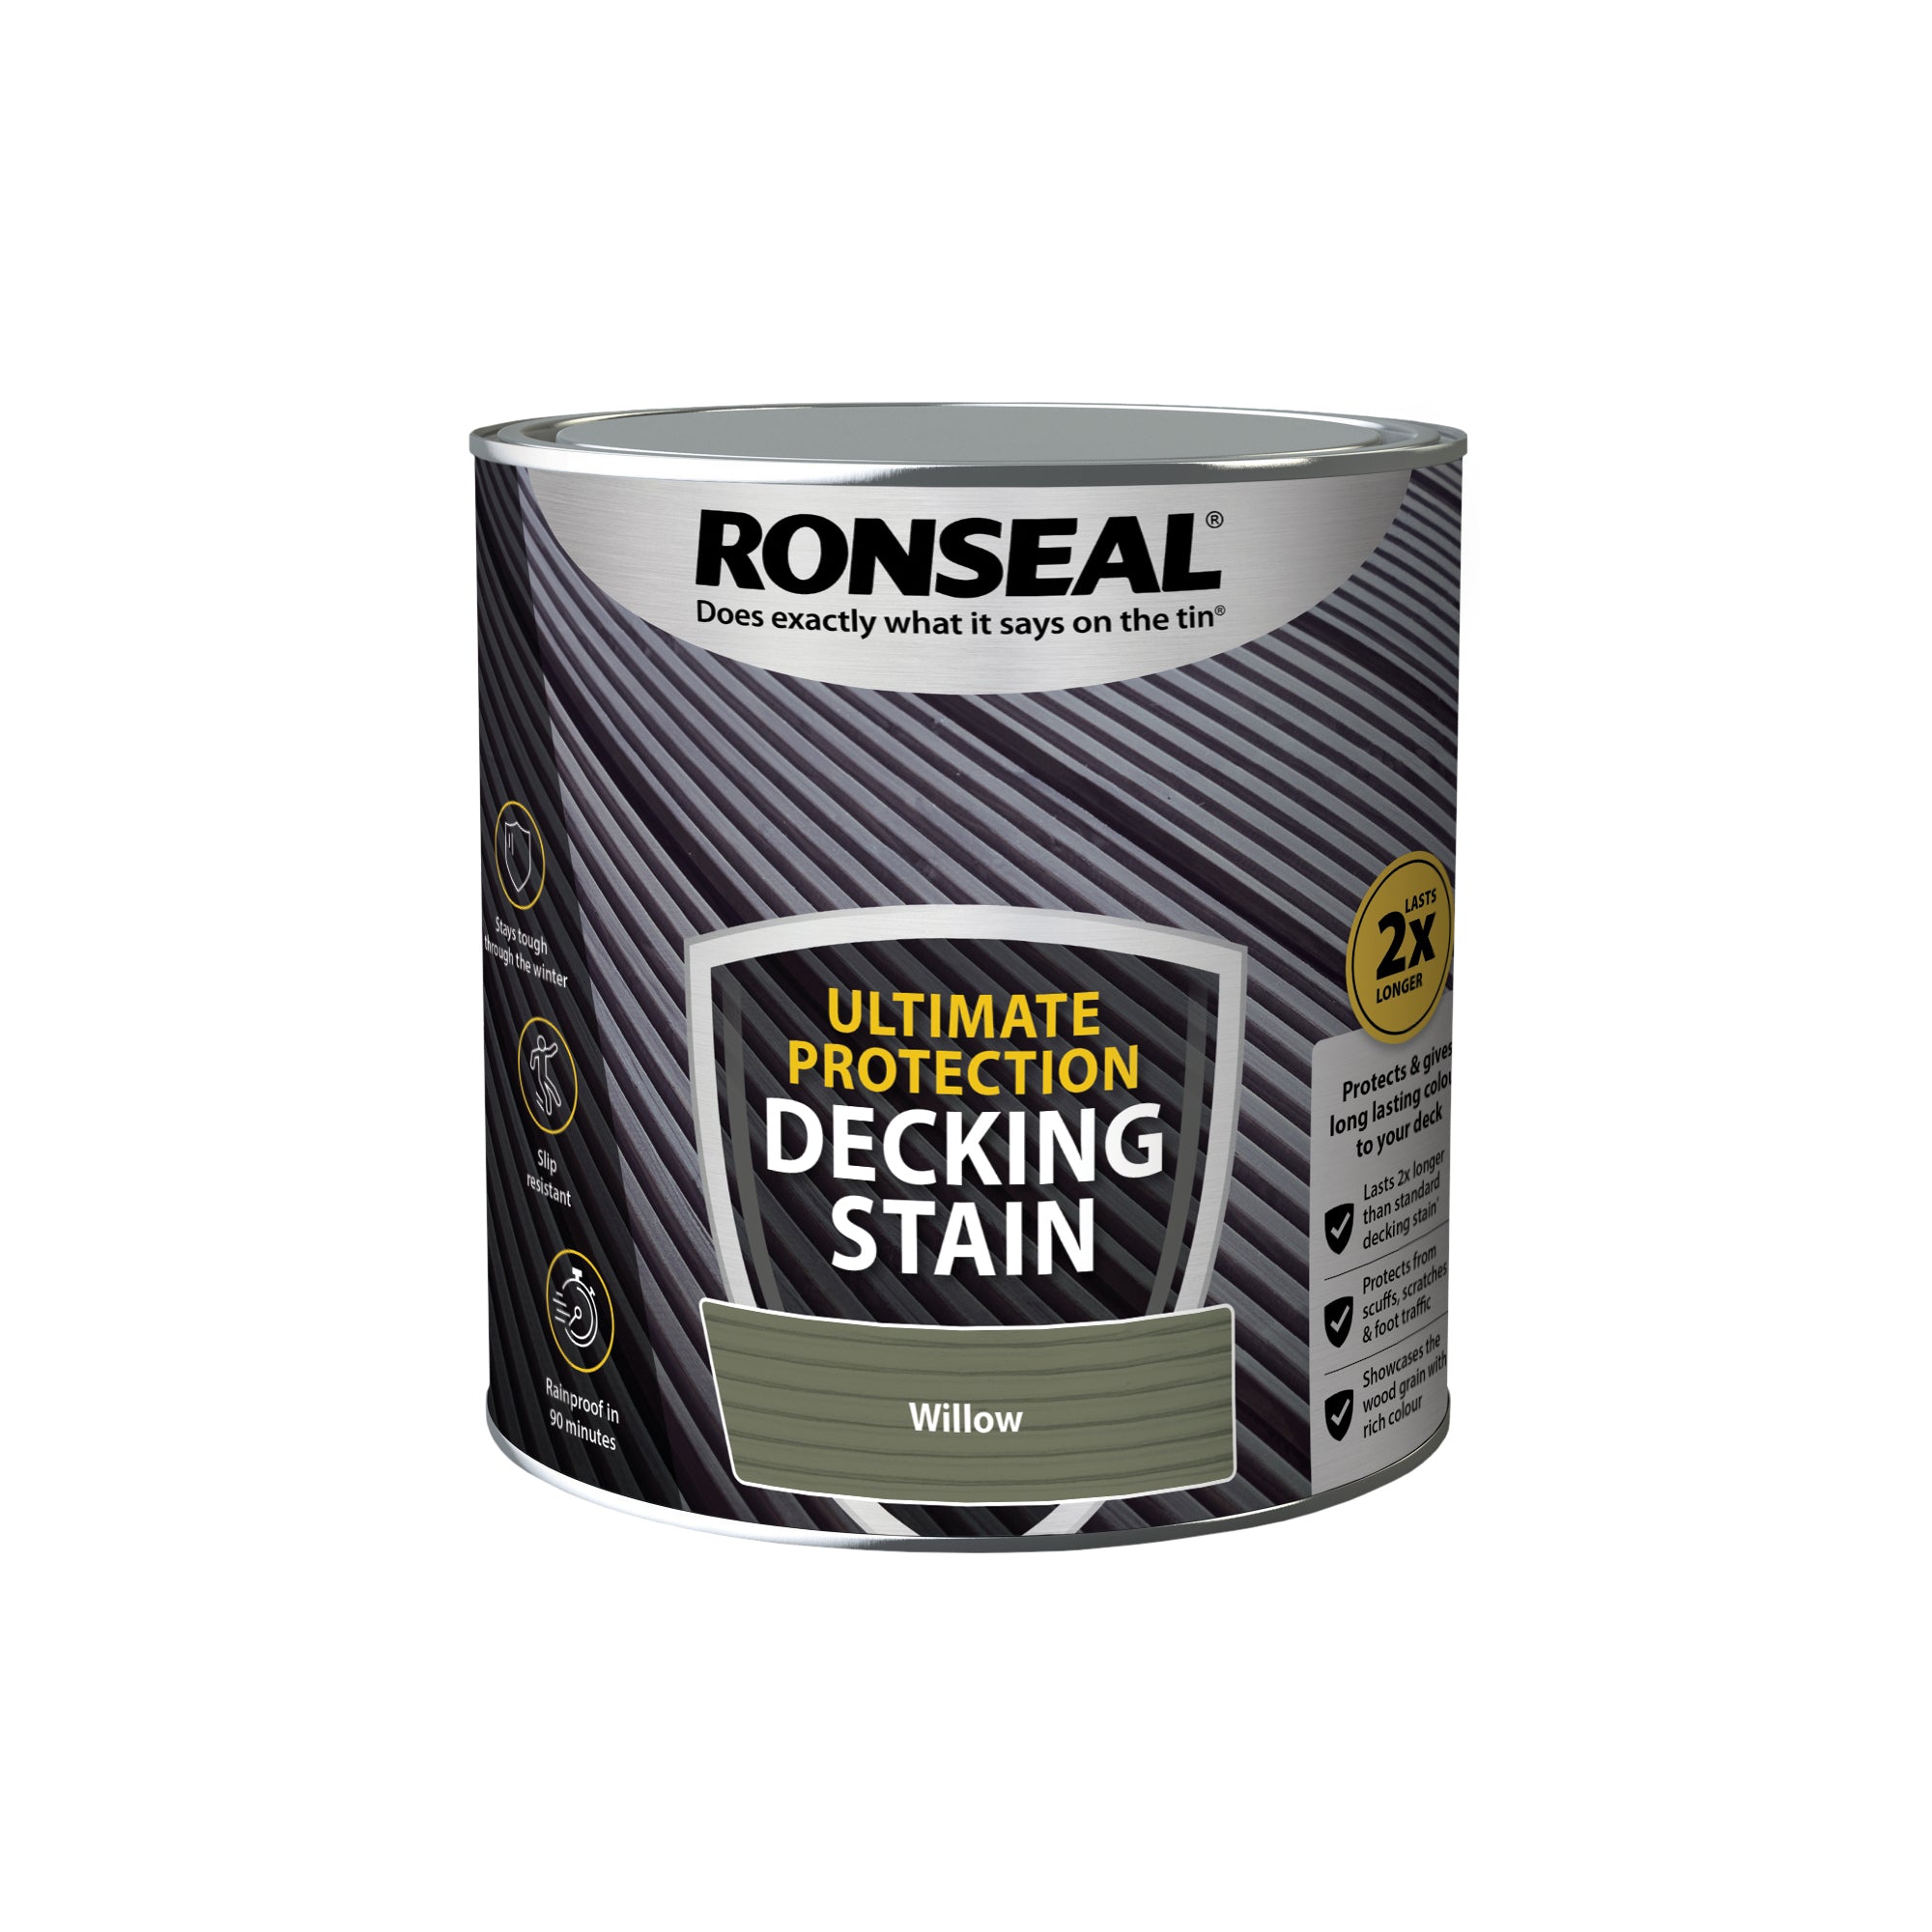 Ronseal-Ultimate-Protection-Decking-Stain-Willow-2.5L